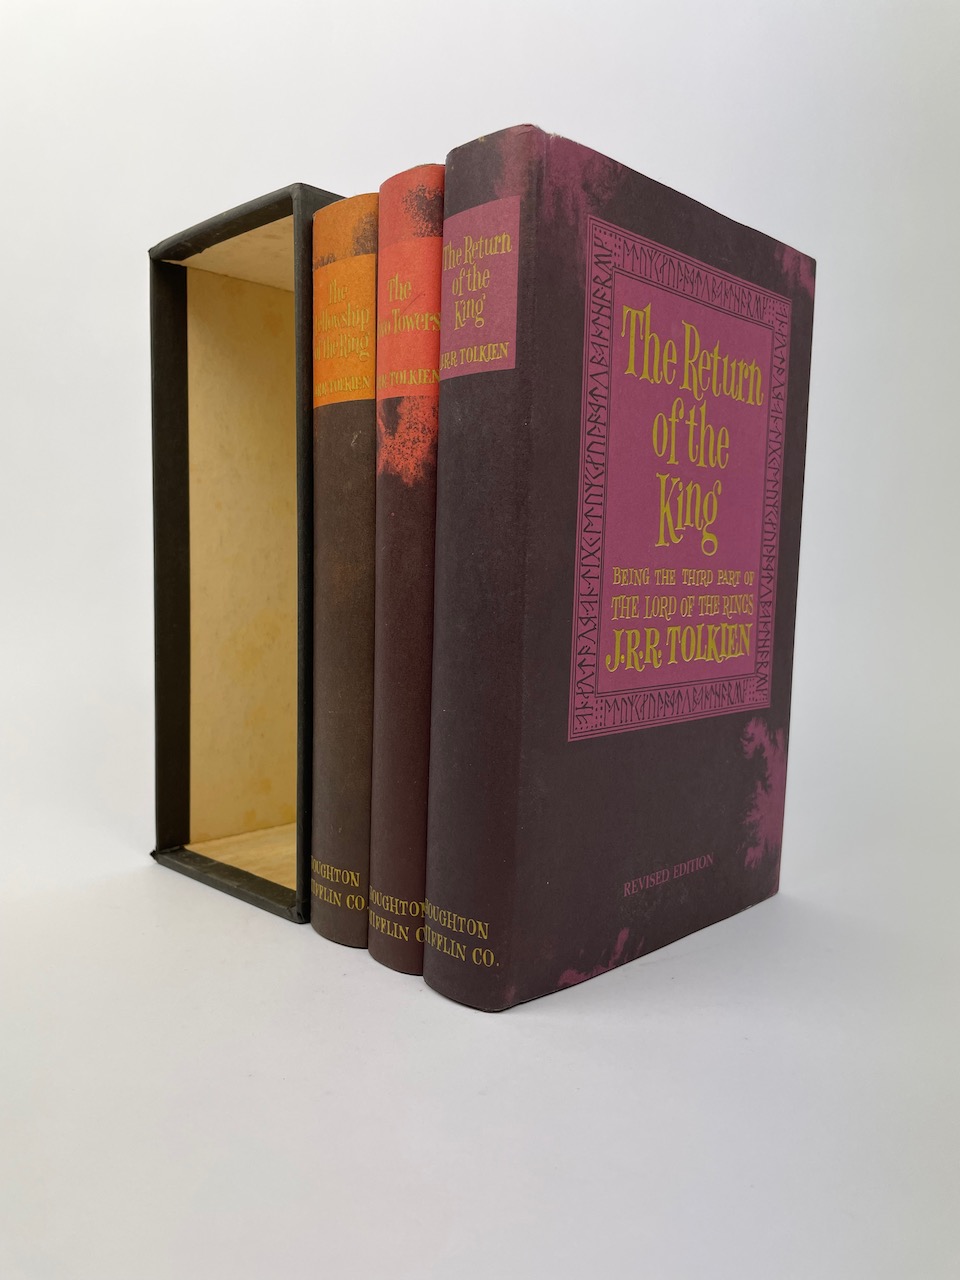 Lord of the Rings, 2nd US Edition in Original Publishers Slipcase and with Dustjackets 9